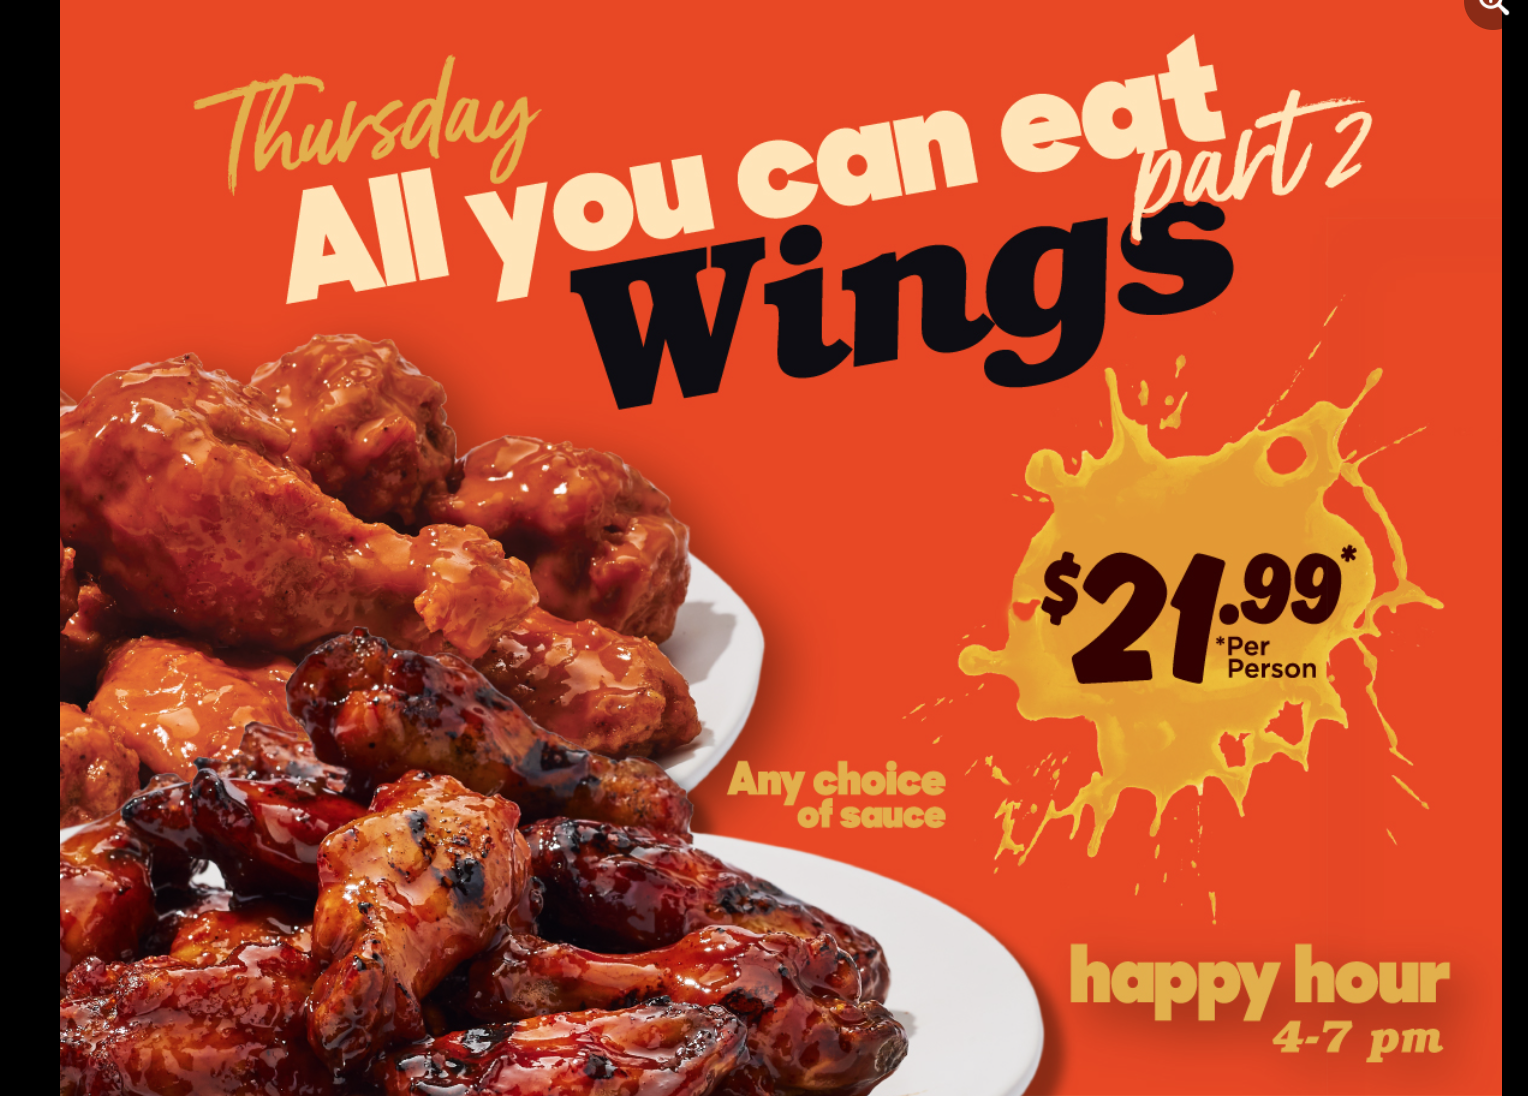 HOOTERS THURSDAY ALL YOU CAN EAT PART 2